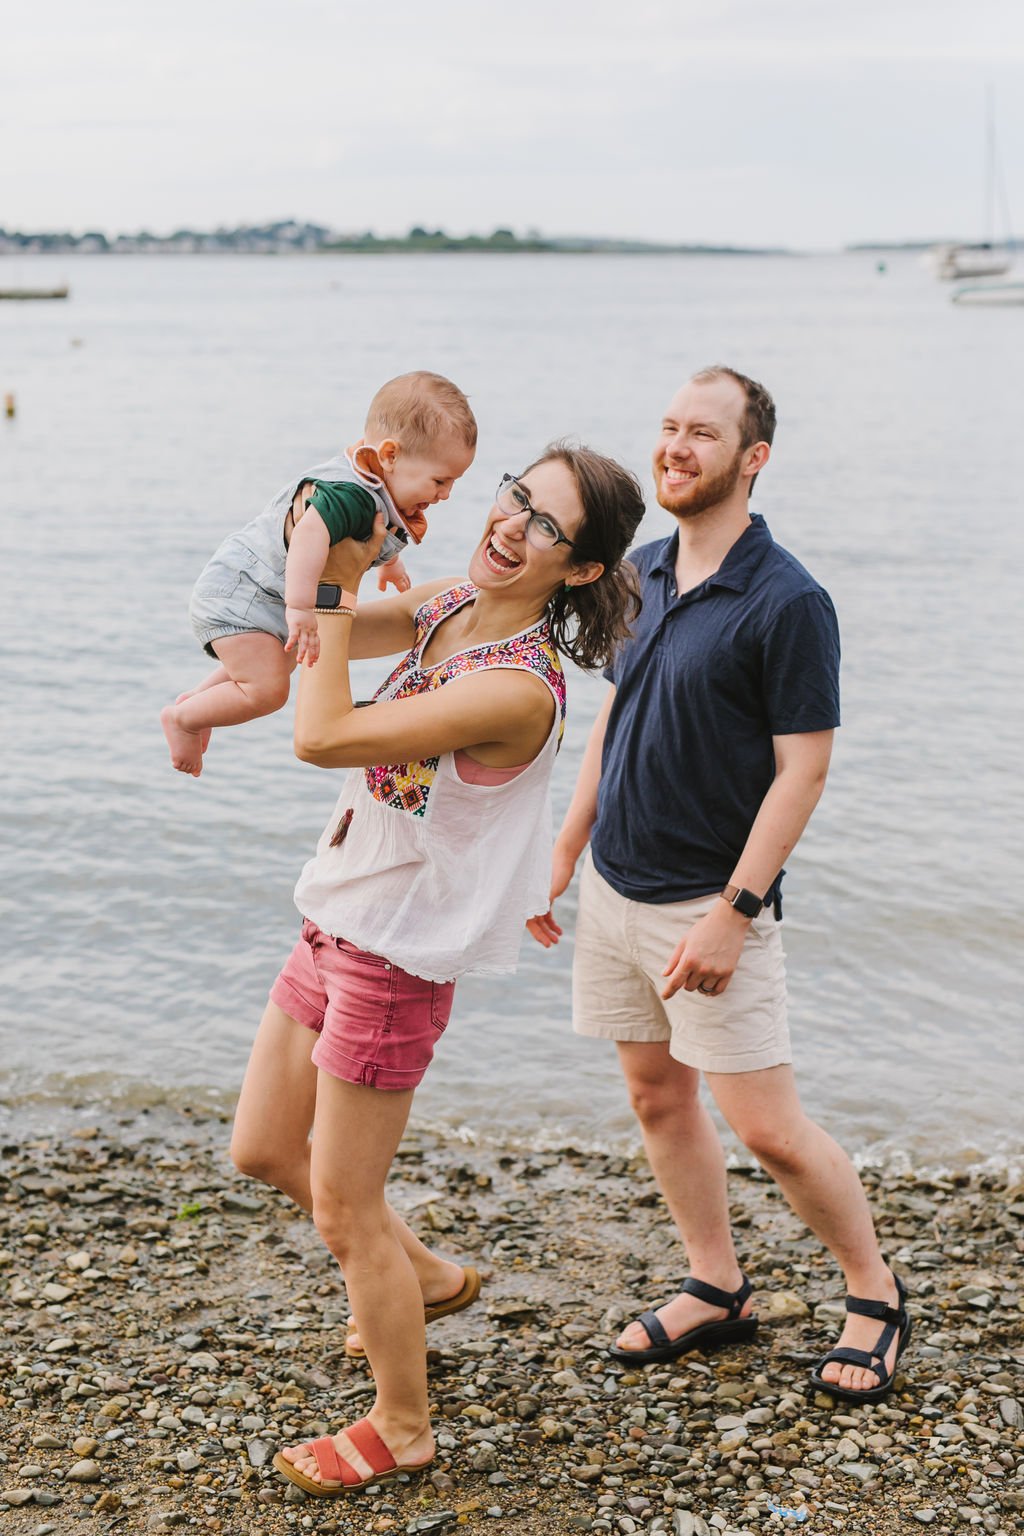 BrintonFamily2021-emily tebbetts photography-76 Wessagusset Beach weymouth family portrait photo session in home day in the life documentary style natural candid boston area family photographer.jpg